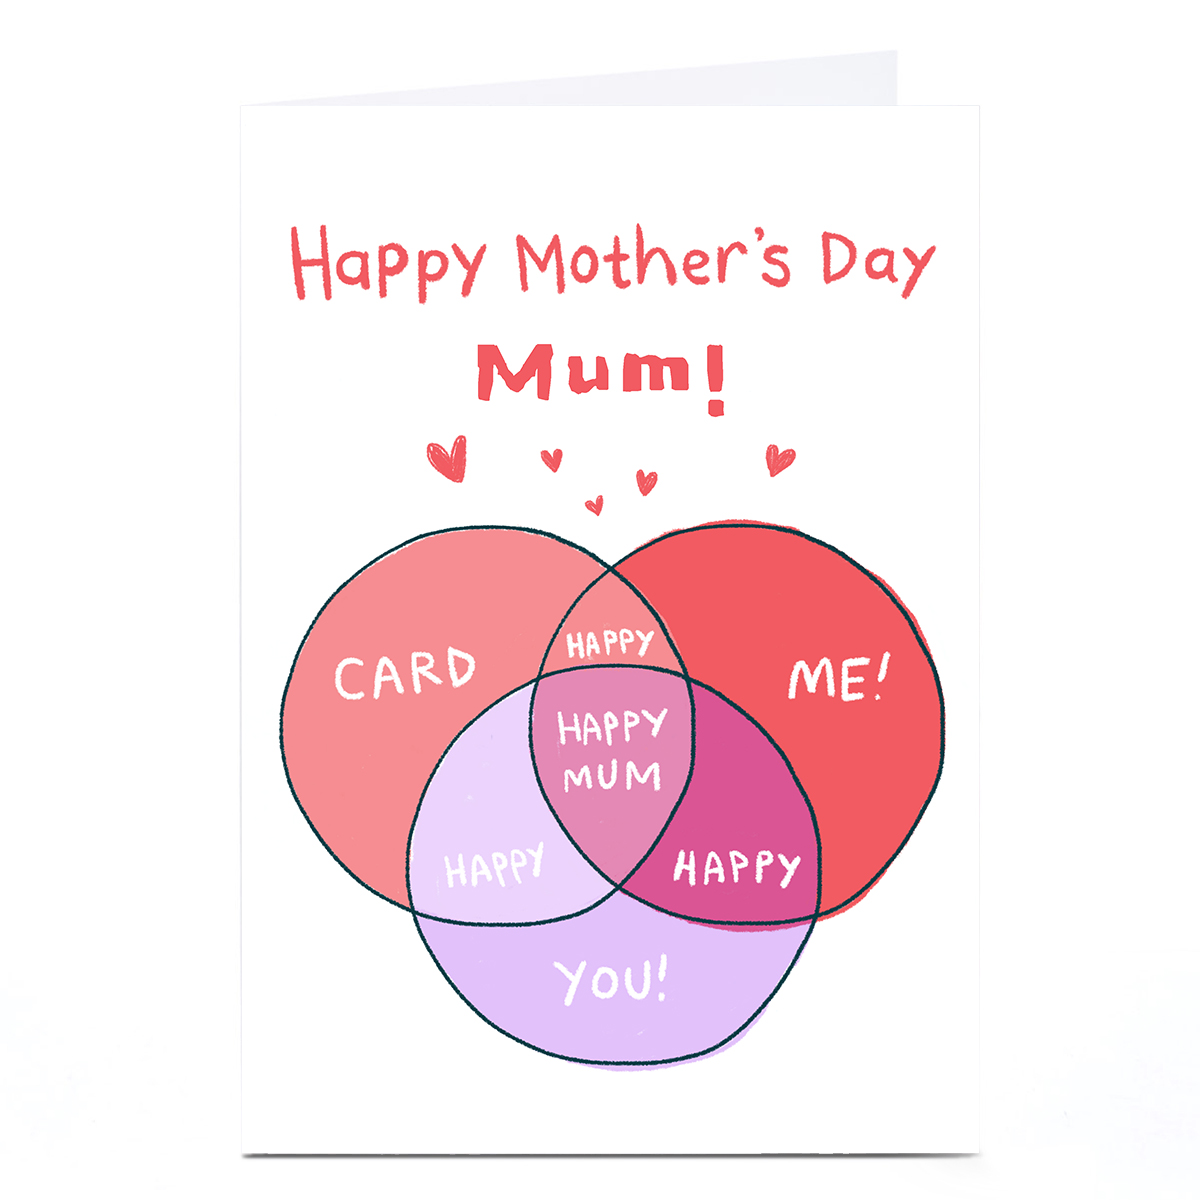 Personalised Hew Ma Mother's Day Card - Venn Diagram